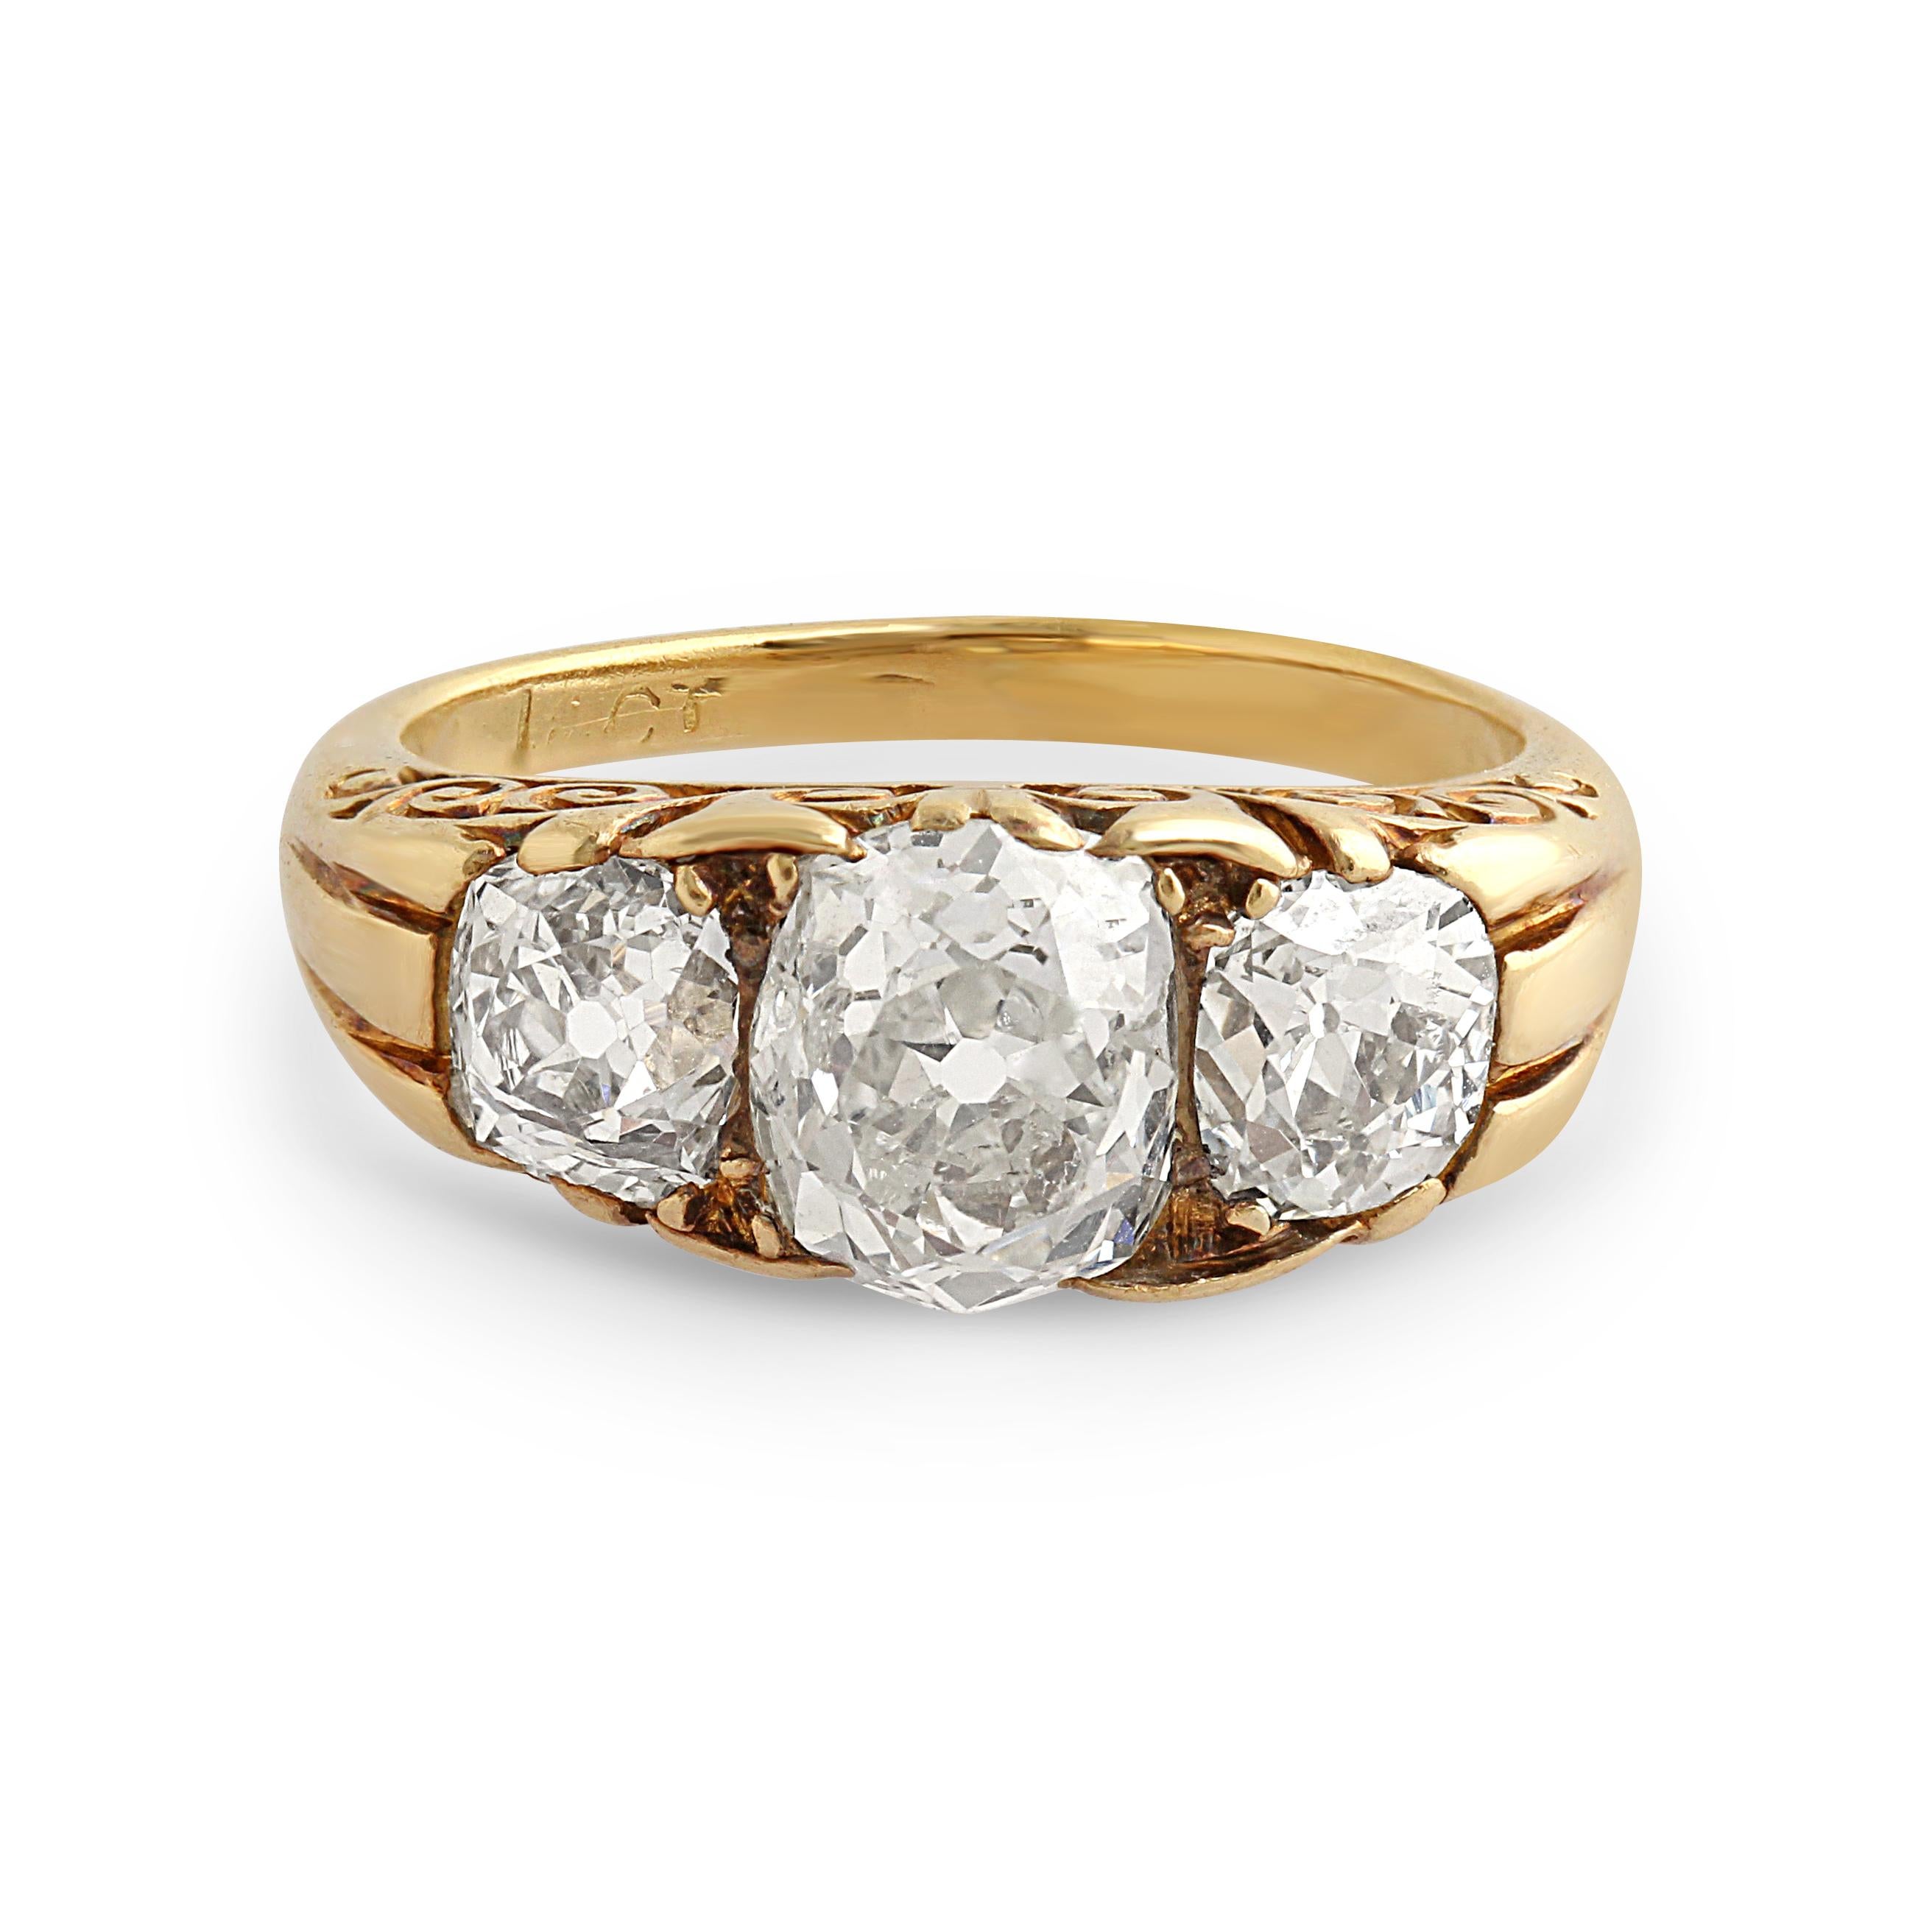 An antique three stone diamond ring set with three old cushion-cut diamonds in an 18k yellow gold mount with scrolling details. Circa 1890s. Size = M. Weight = 6.40gr.